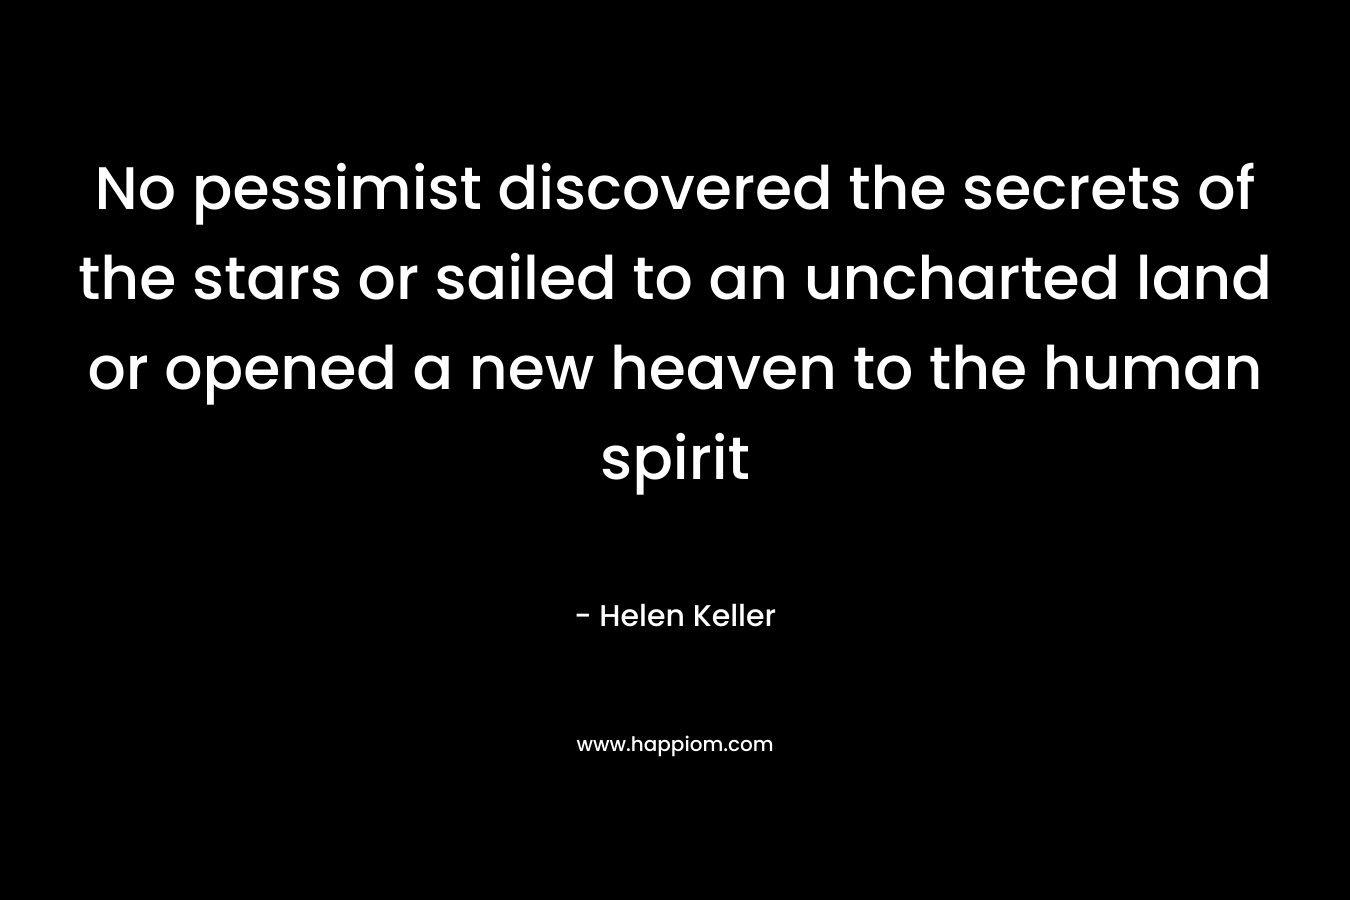 No pessimist discovered the secrets of the stars or sailed to an uncharted land or opened a new heaven to the human spirit – Helen Keller